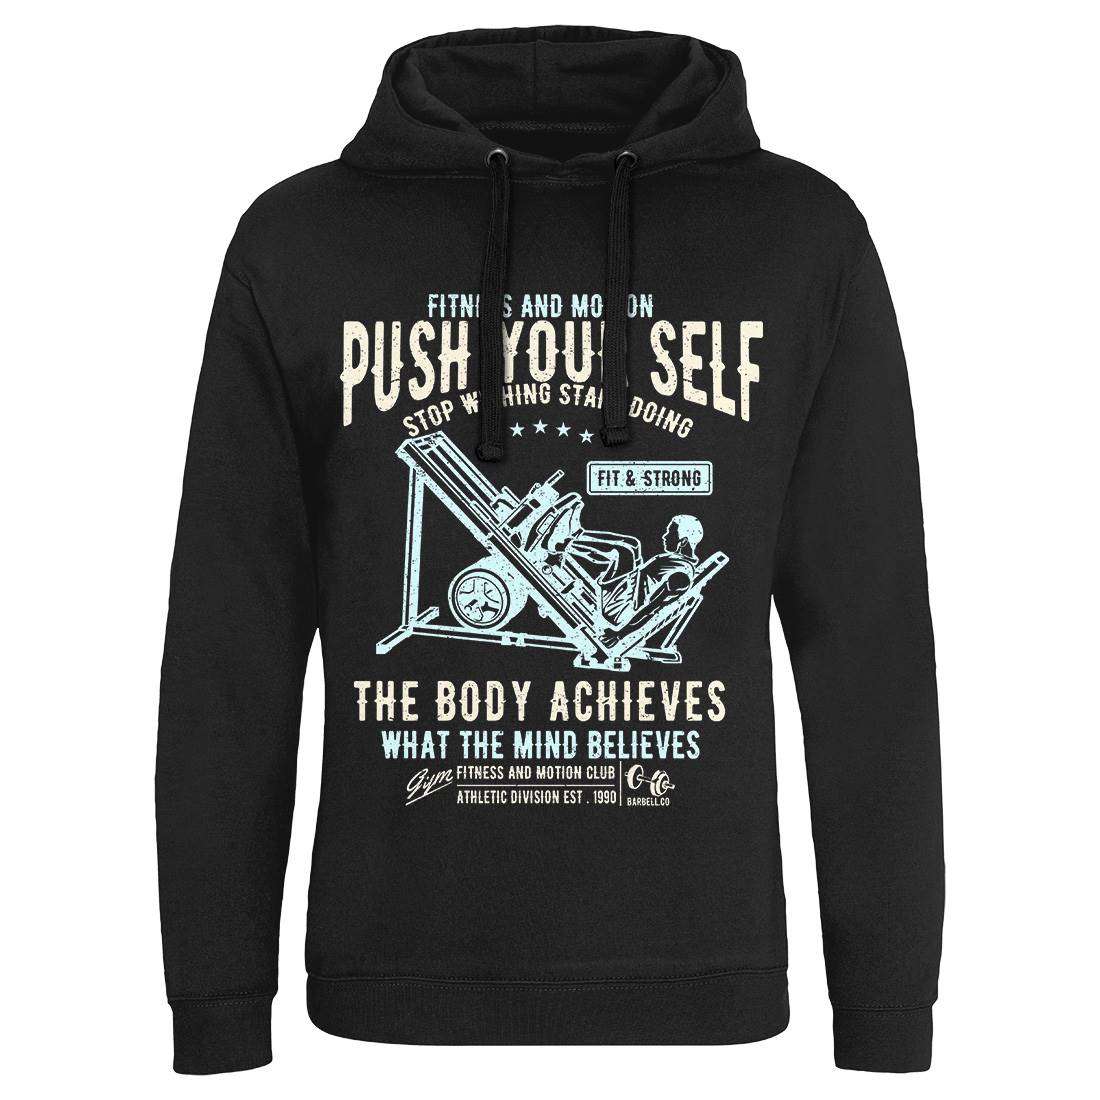 Push Yourself Mens Hoodie Without Pocket Gym A114